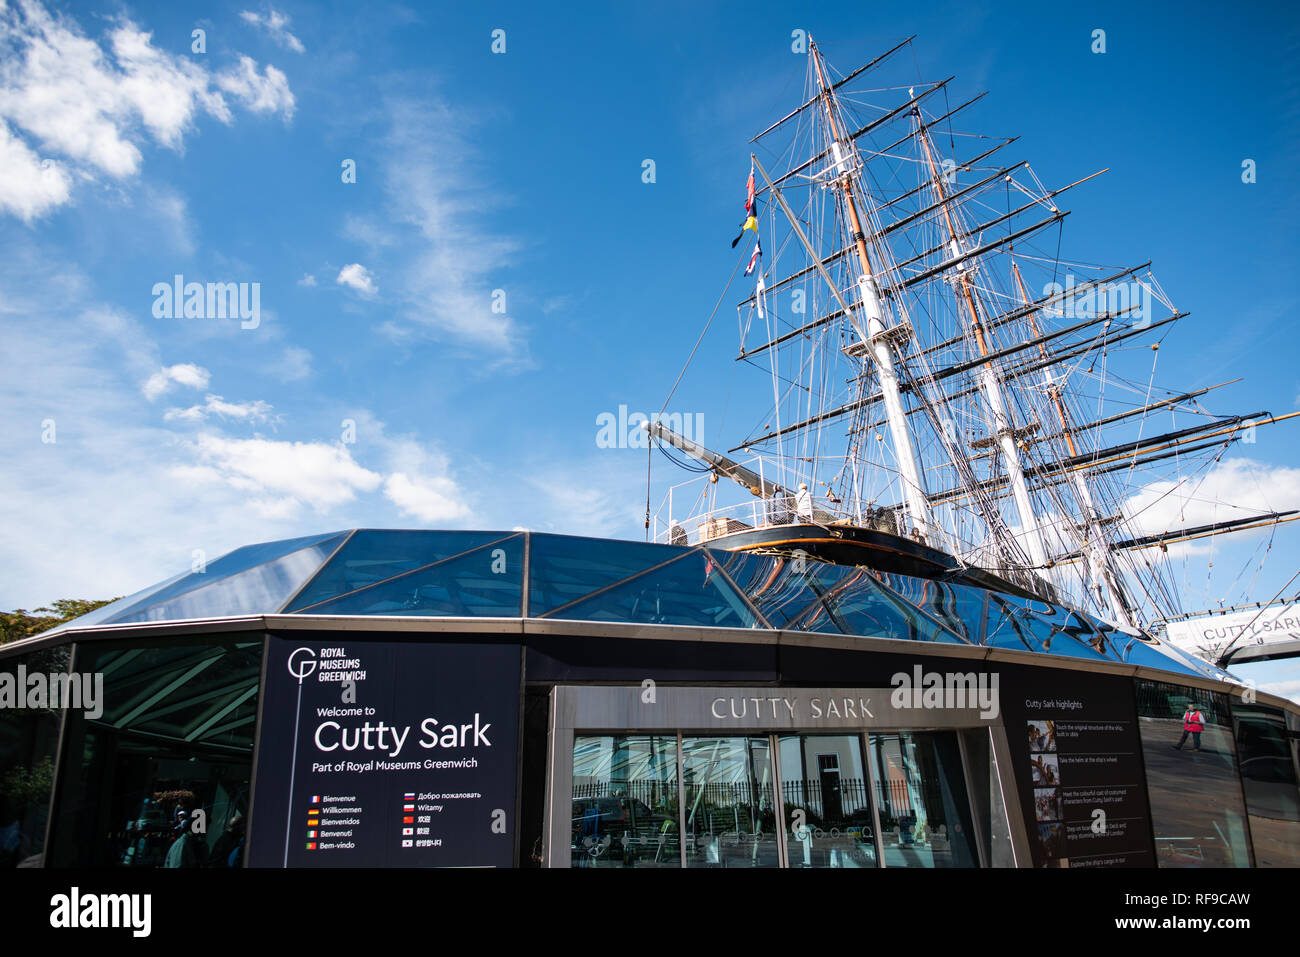 GREENWICH, UK - The Cutty Sark is a restored historic British clipper sailing ship that is now open as a tourist attraction in Greenwich, London. It was built in 1869 and in active service until 1895. In its heyday as a trader vessel, it was known as the fastest ship of its time. It was notable for its participation in the tea trade between Asia and Europe. When the opening of the Suez Canal created the opportunity for shorter and faster trips made by steam ships, the Cutty Sark was used to transport wool from Australia to Britain. Stock Photo